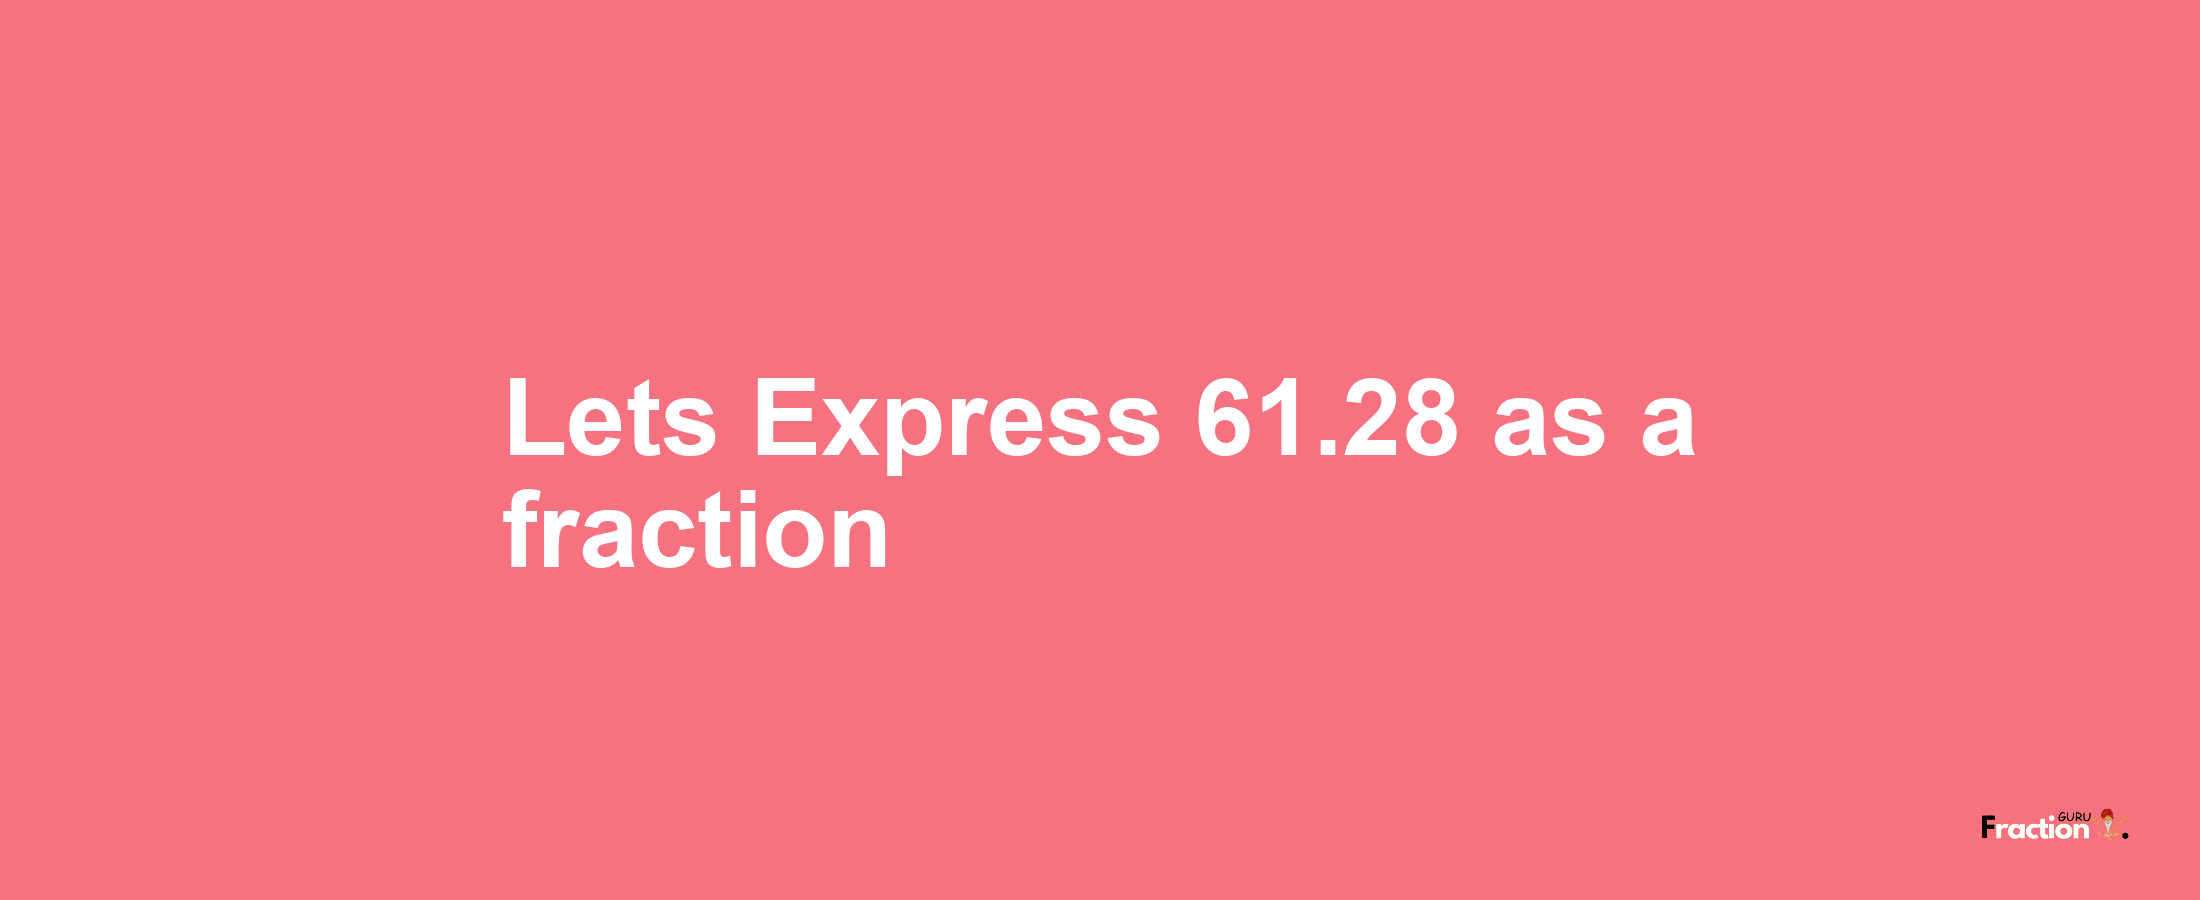 Lets Express 61.28 as afraction